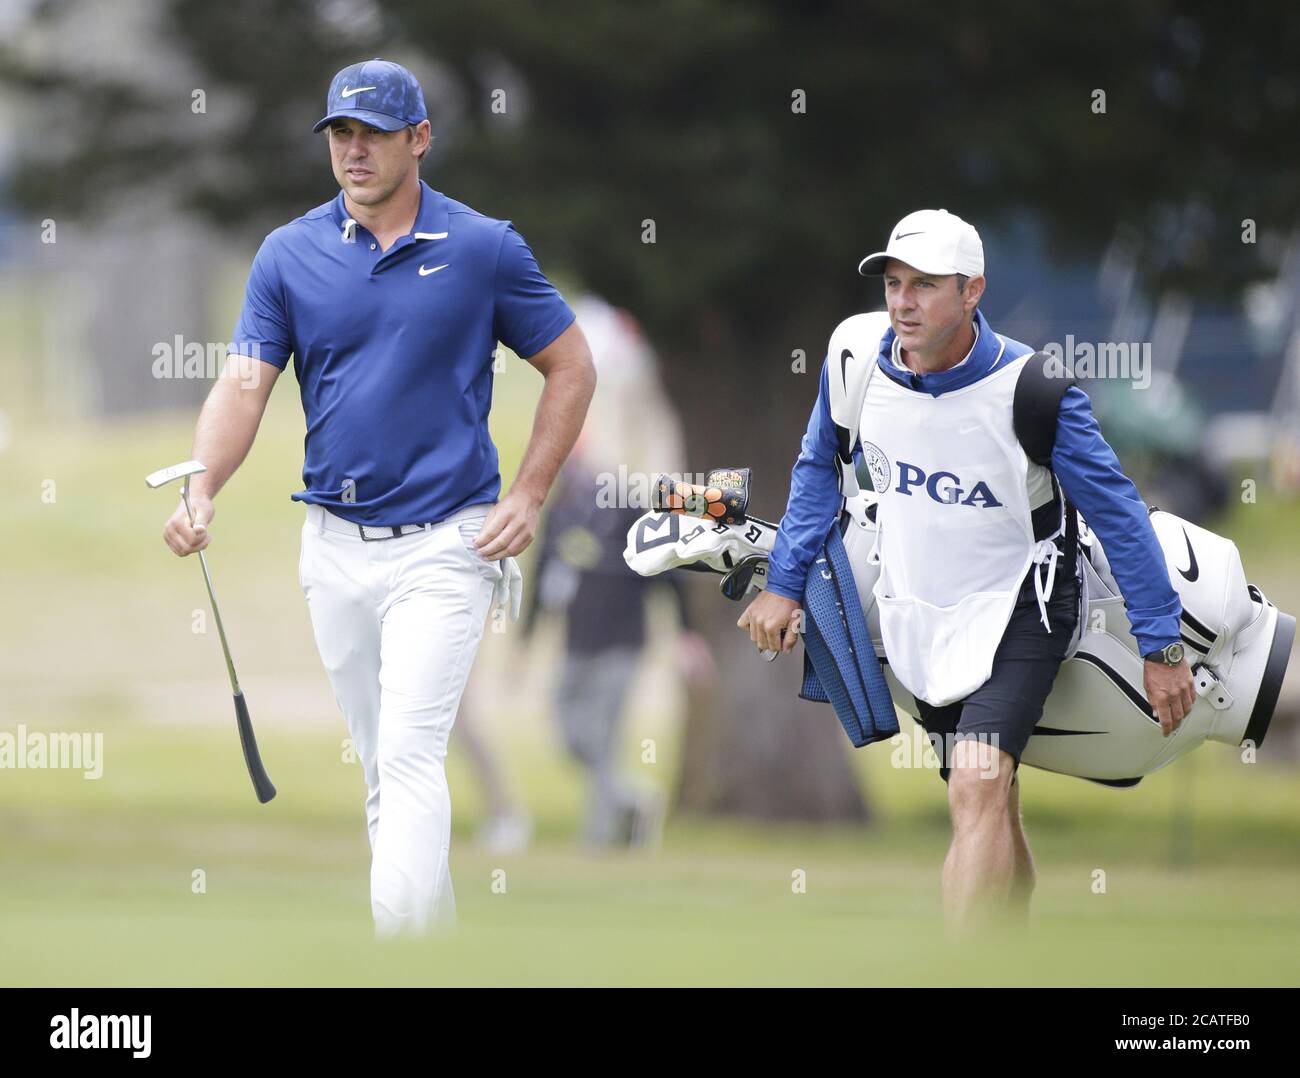 San Francisco, United States. 08th Aug, 2020. Brooks Koepka walks to the third hole in the third round of the 102nd PGA Championship at TPC Harding Park in San Francisco on Saturday, August 8, 2020. Photo by John Angelillo/UPI Credit: UPI/Alamy Live News Stock Photo